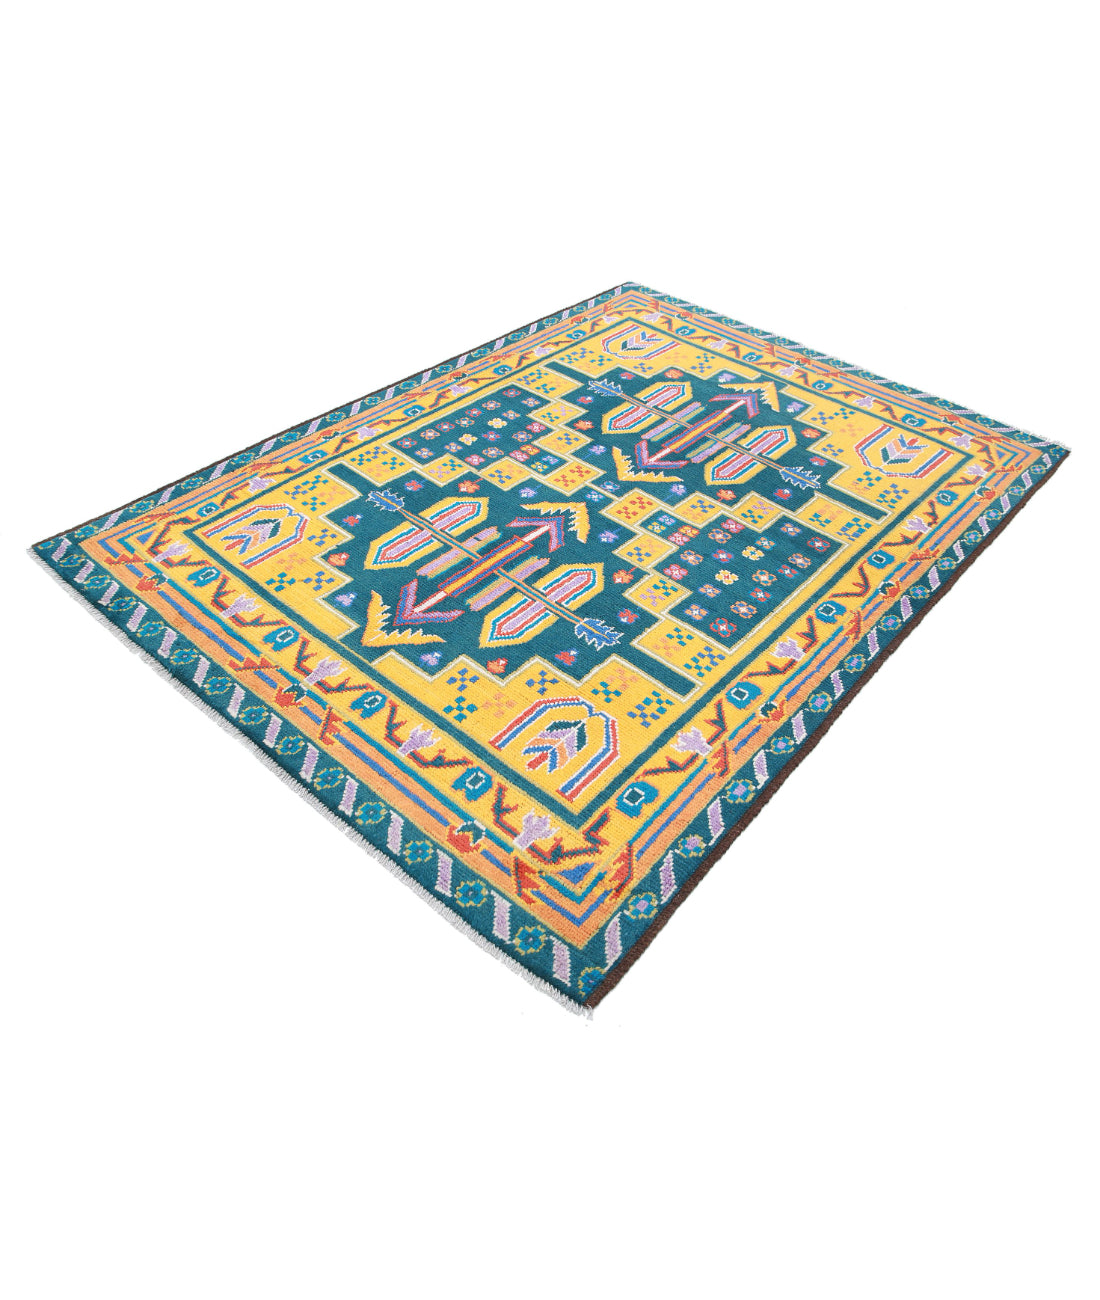 Revival 5'6'' X 7'8'' Hand-Knotted Wool Rug 5'6'' x 7'8'' (165 X 230) / Green / Gold